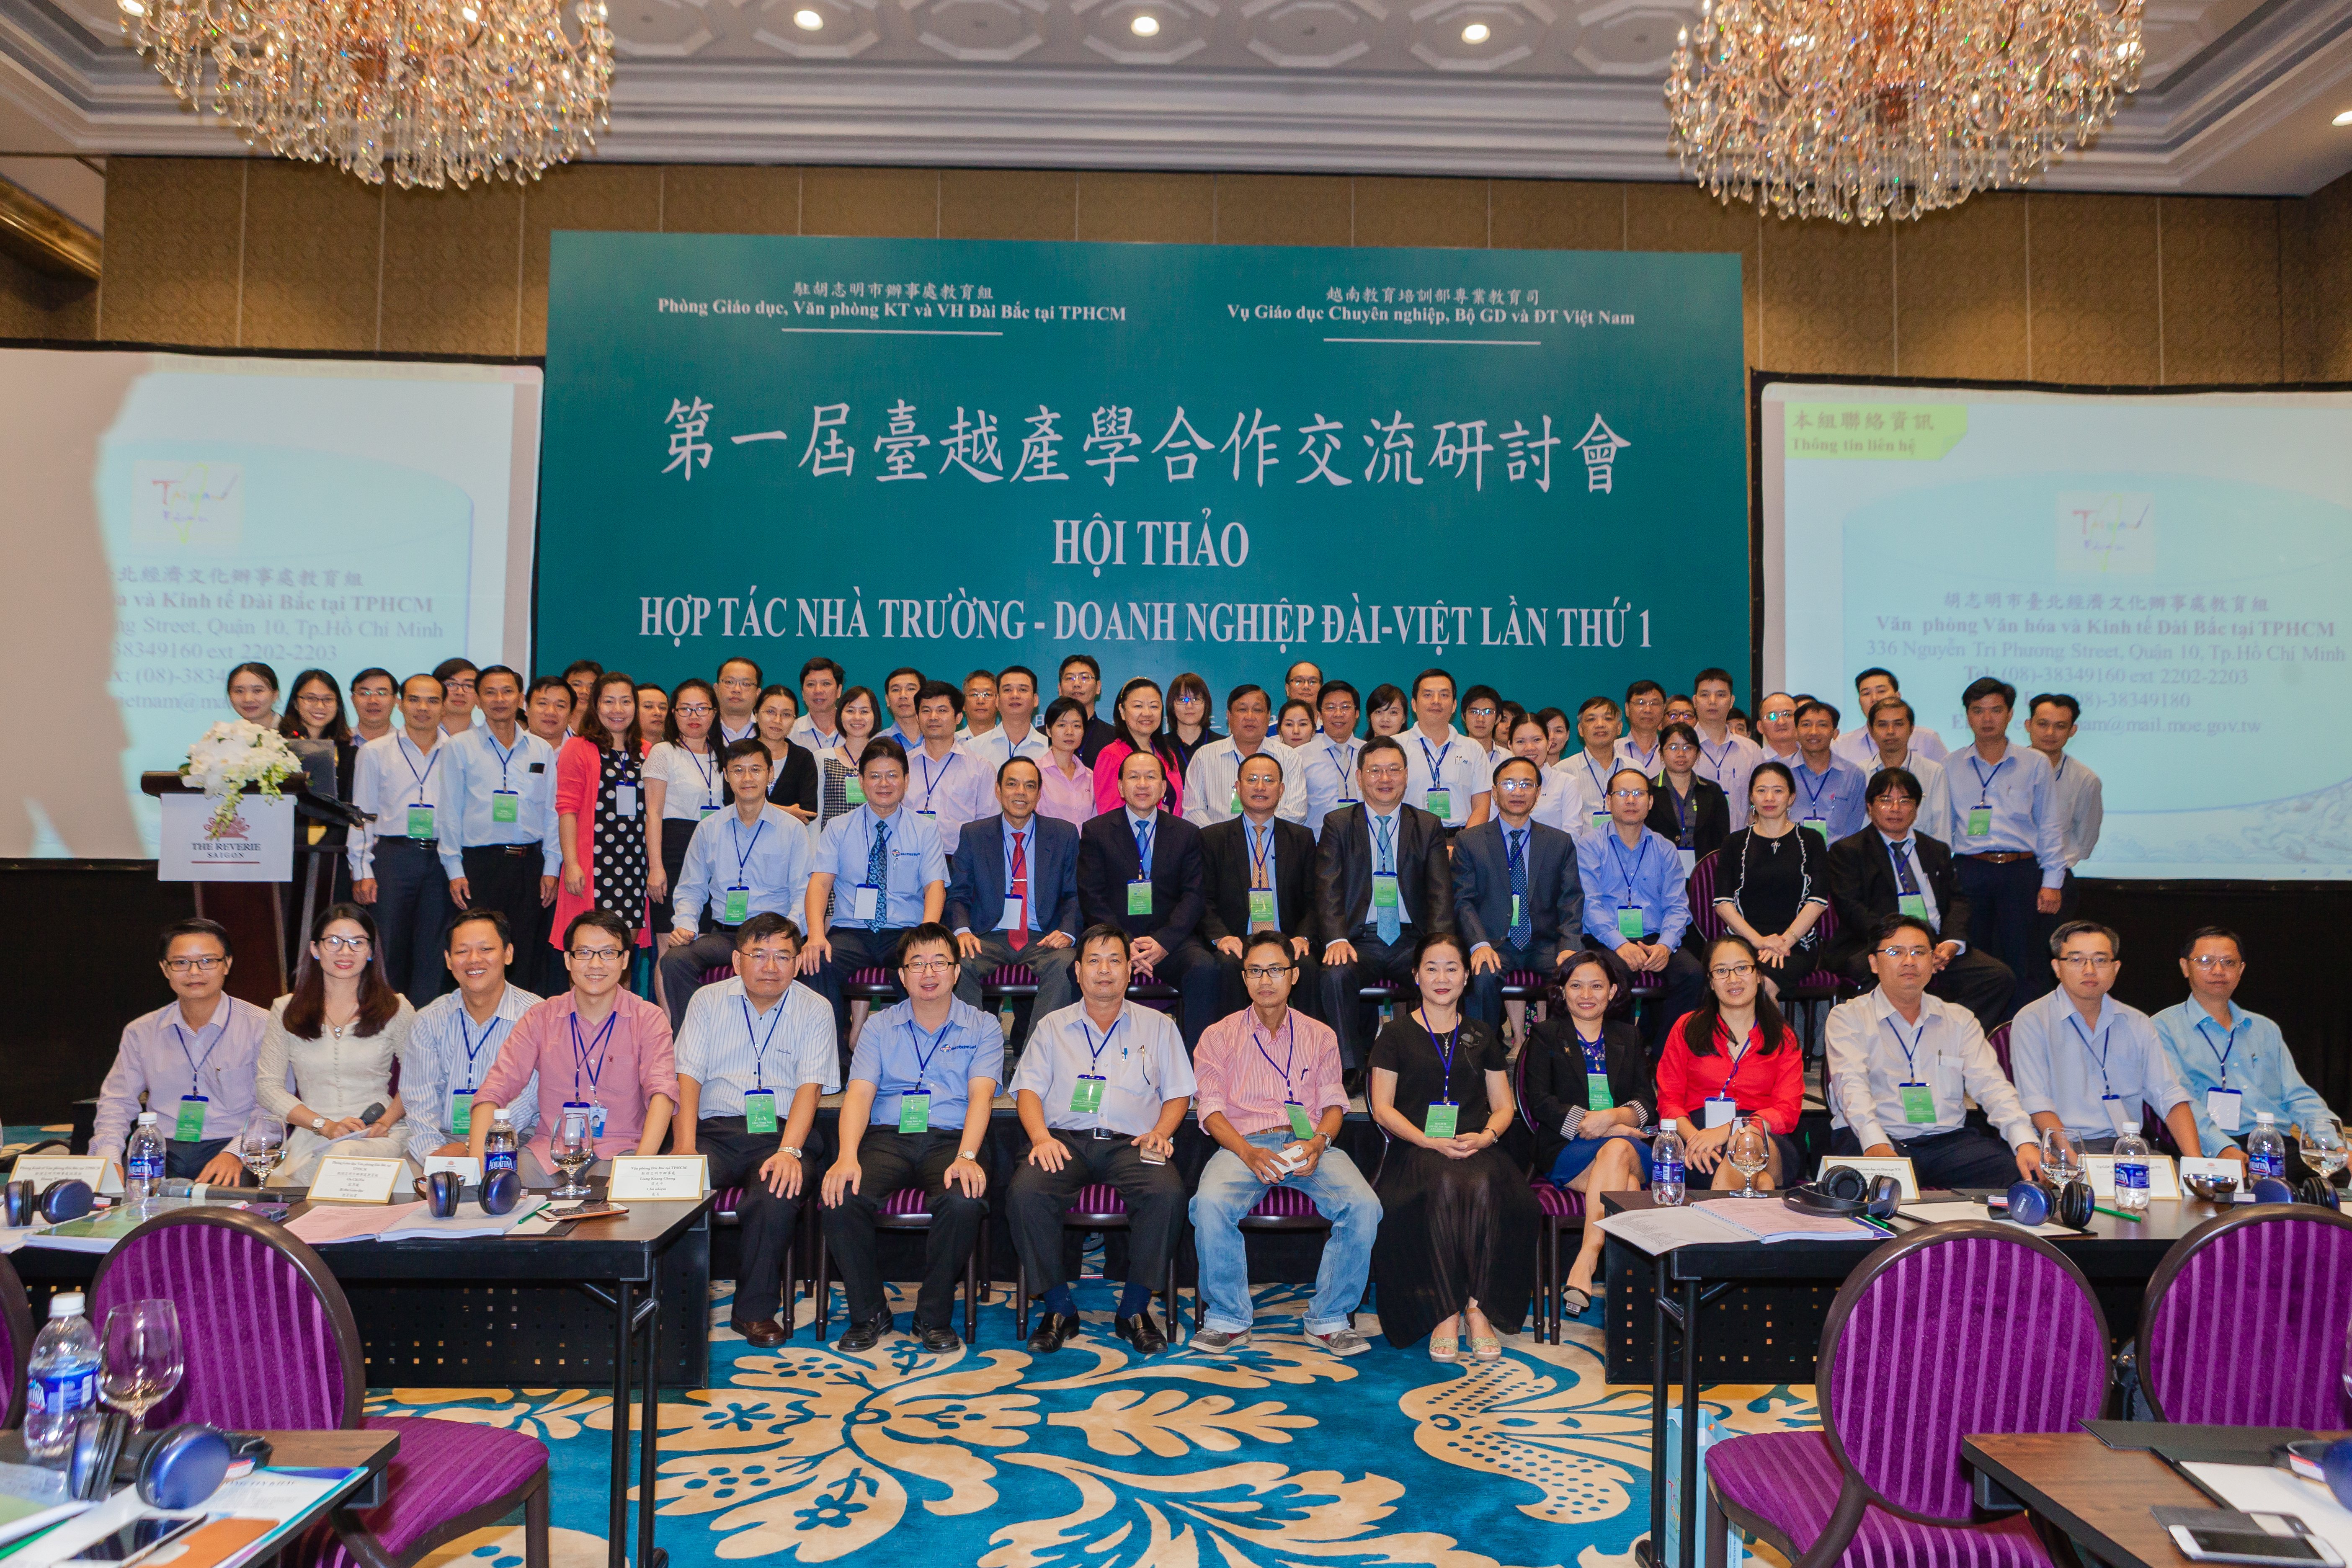 Taipei Economic and Cultural Office in Ho Chi Minh City and Ministry of Education and Training, Vietnam co-host the first Taiwan-Vietnam Industrial Cooperation Seminar